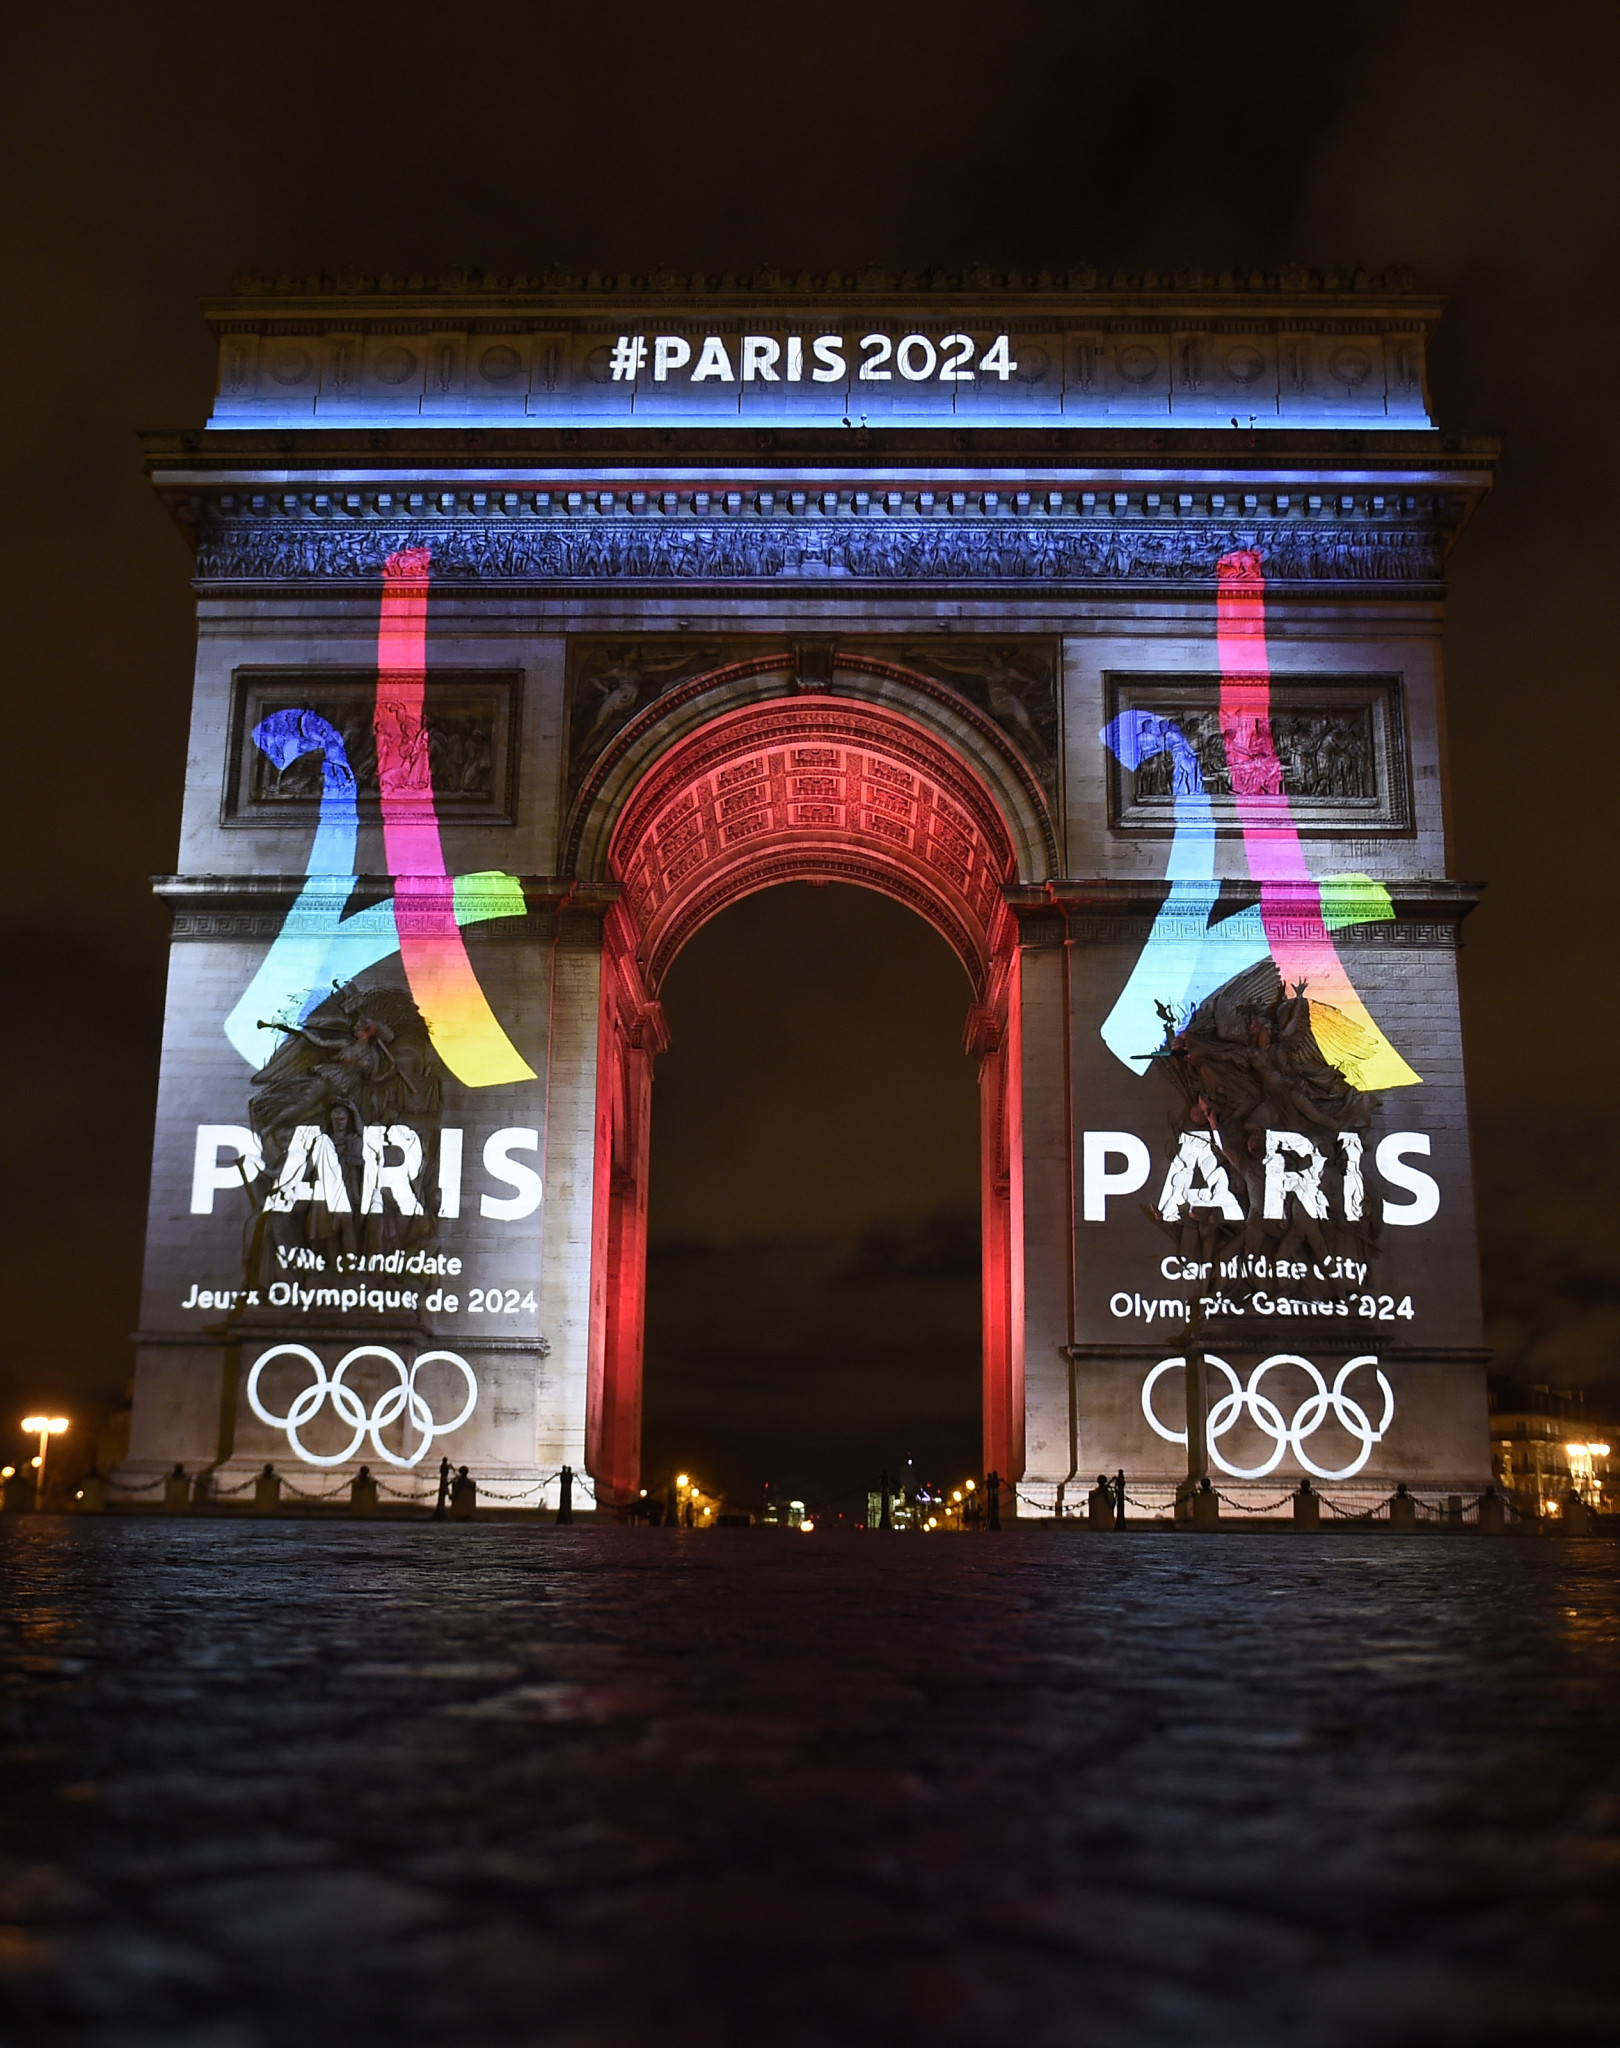 Paris 2024 is one of the sporting events that is a beneficiary of the tax exemption law ©Getty Images